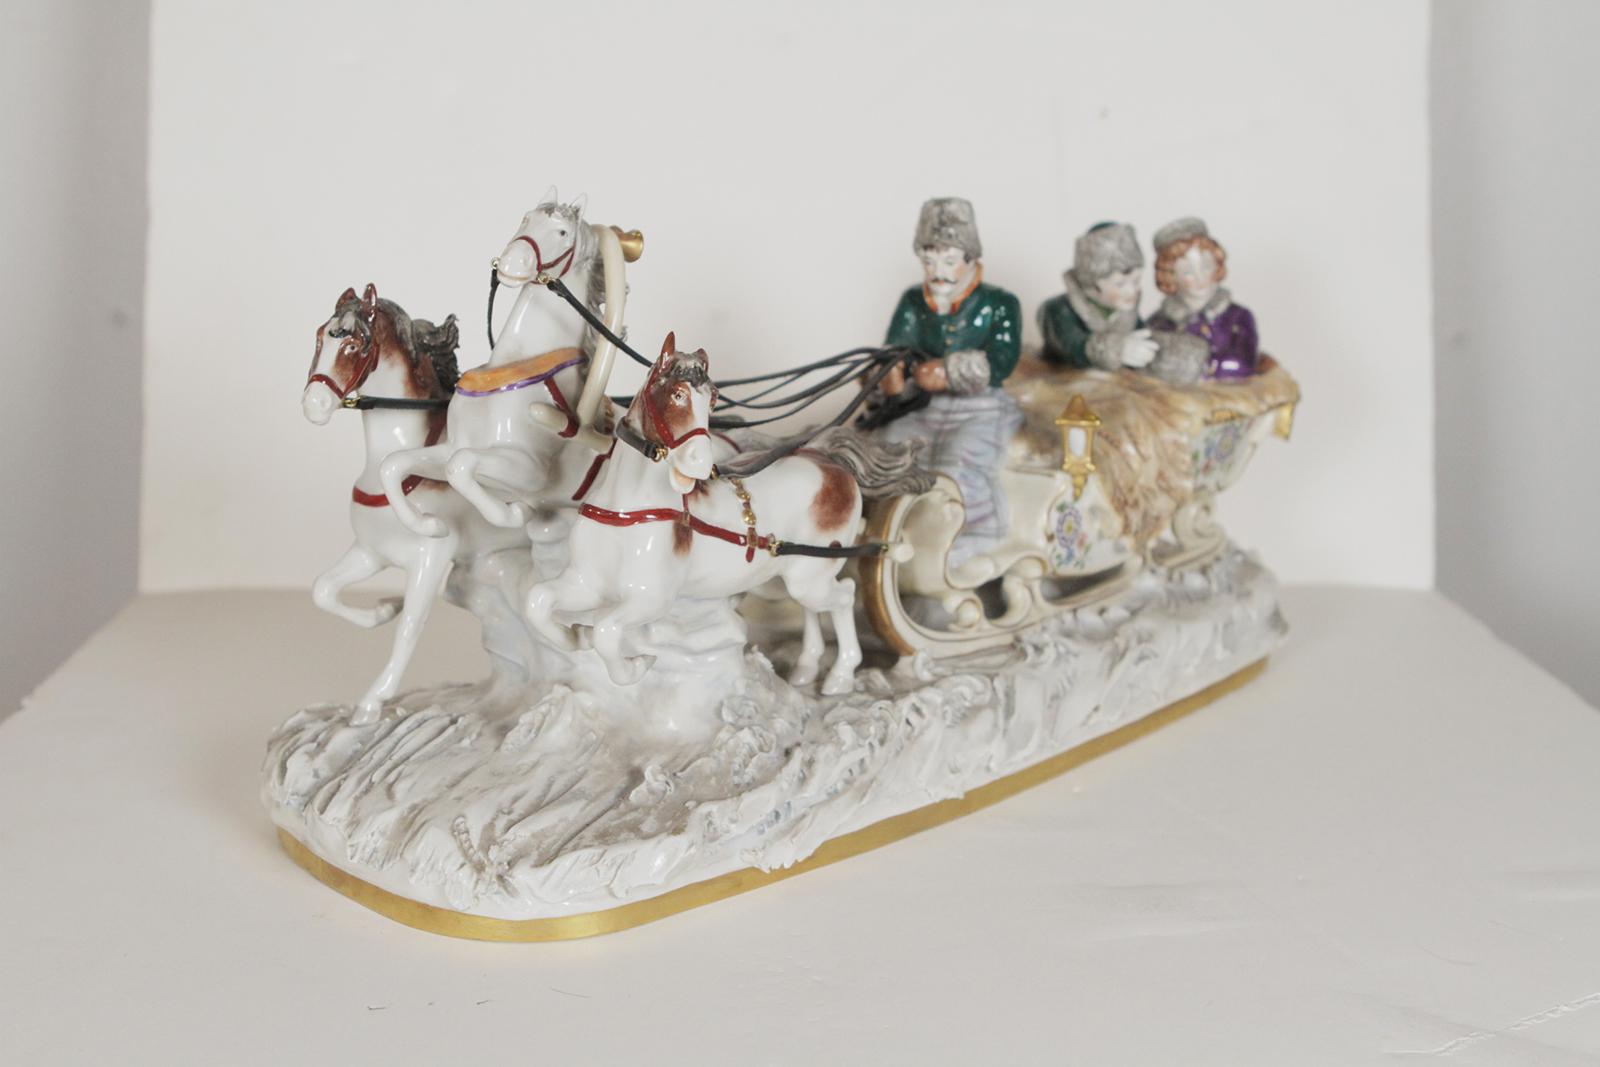 Screibe-Ansbach hand painted porcelain figure. Made in Germany “St. Petersburg, Russia Sleigh Ride” Circa 1950 

Dimensions: 15.5